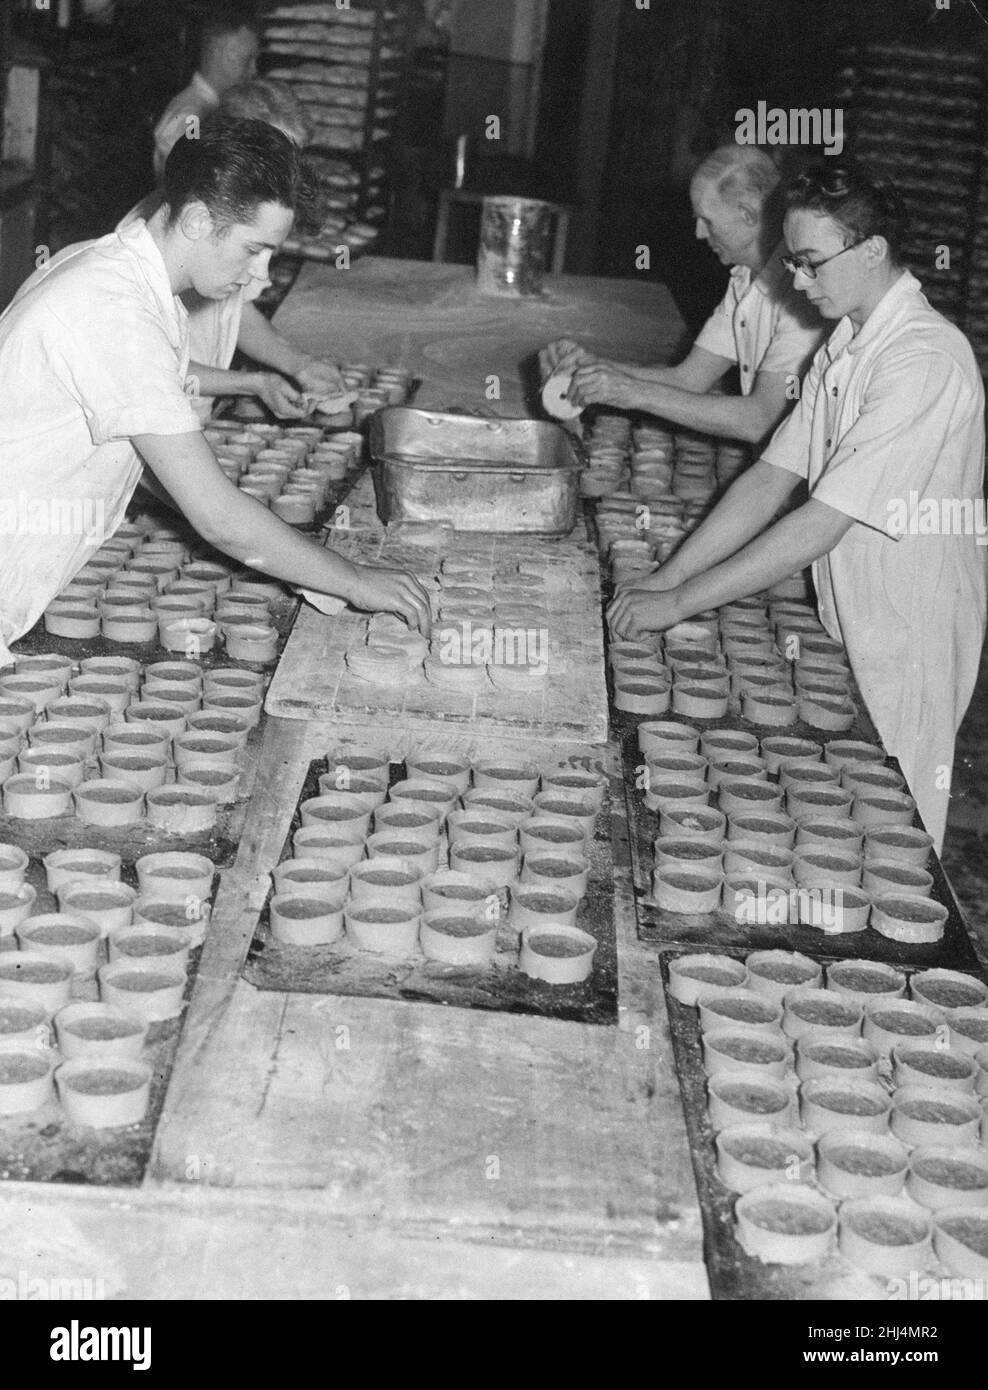 Bakers topping pies about to be put into the oven at a Edinburgh Bakery, Friday 1st February 1957.  Extra supplies are anticipated with large crowds expected  for three matches in the city this Saturday, cafes and restaurants are sure to be busy.   Sottish FA Cup Fifth round matches Hibernian v Aberdeen,  Heart of Midlothian v Rangers and Edinburgh FC v TBC? Stock Photo